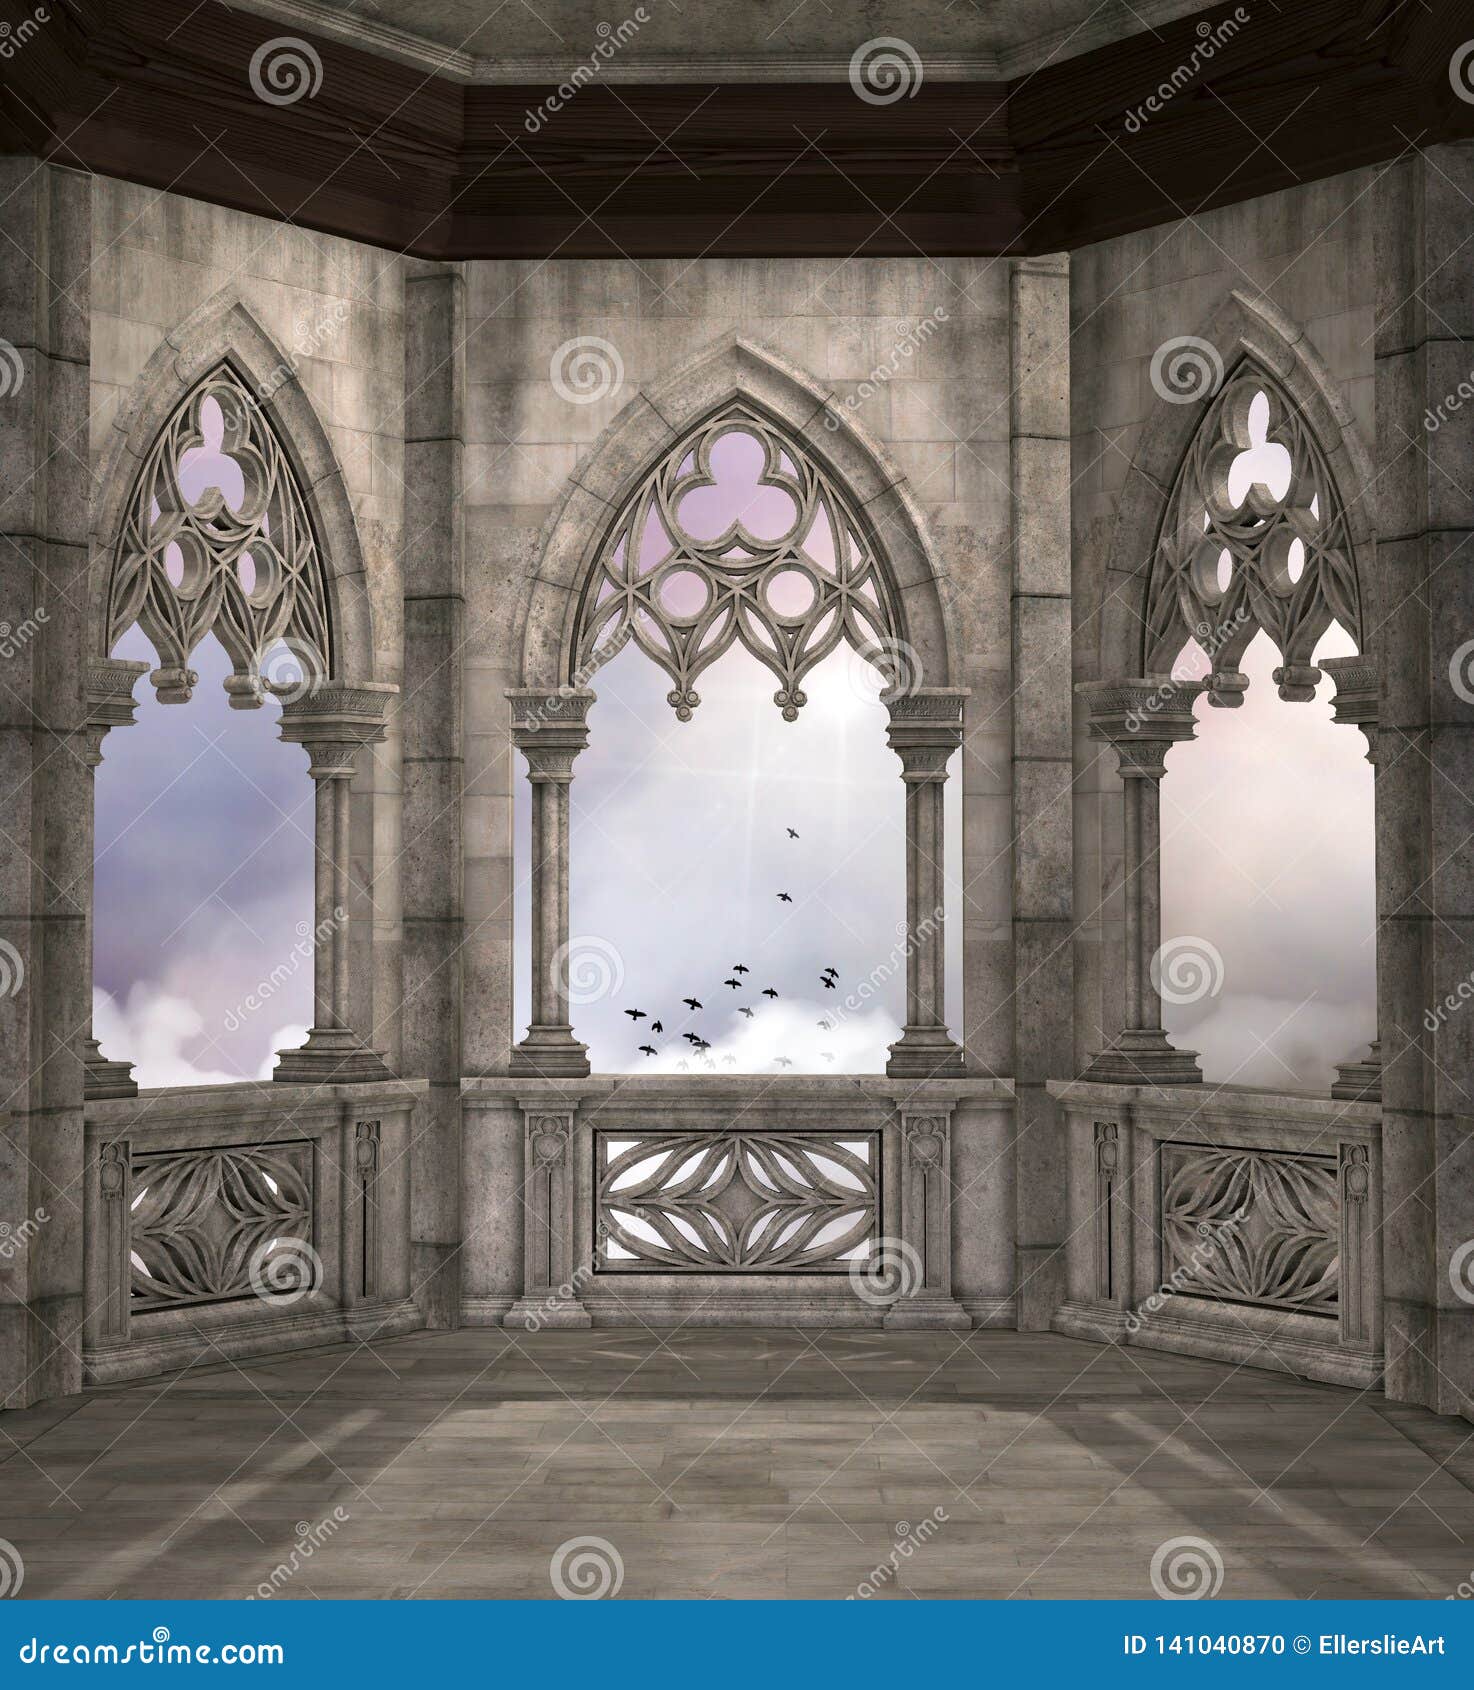 medieval fantasy balcony overlooking a cloudy sky